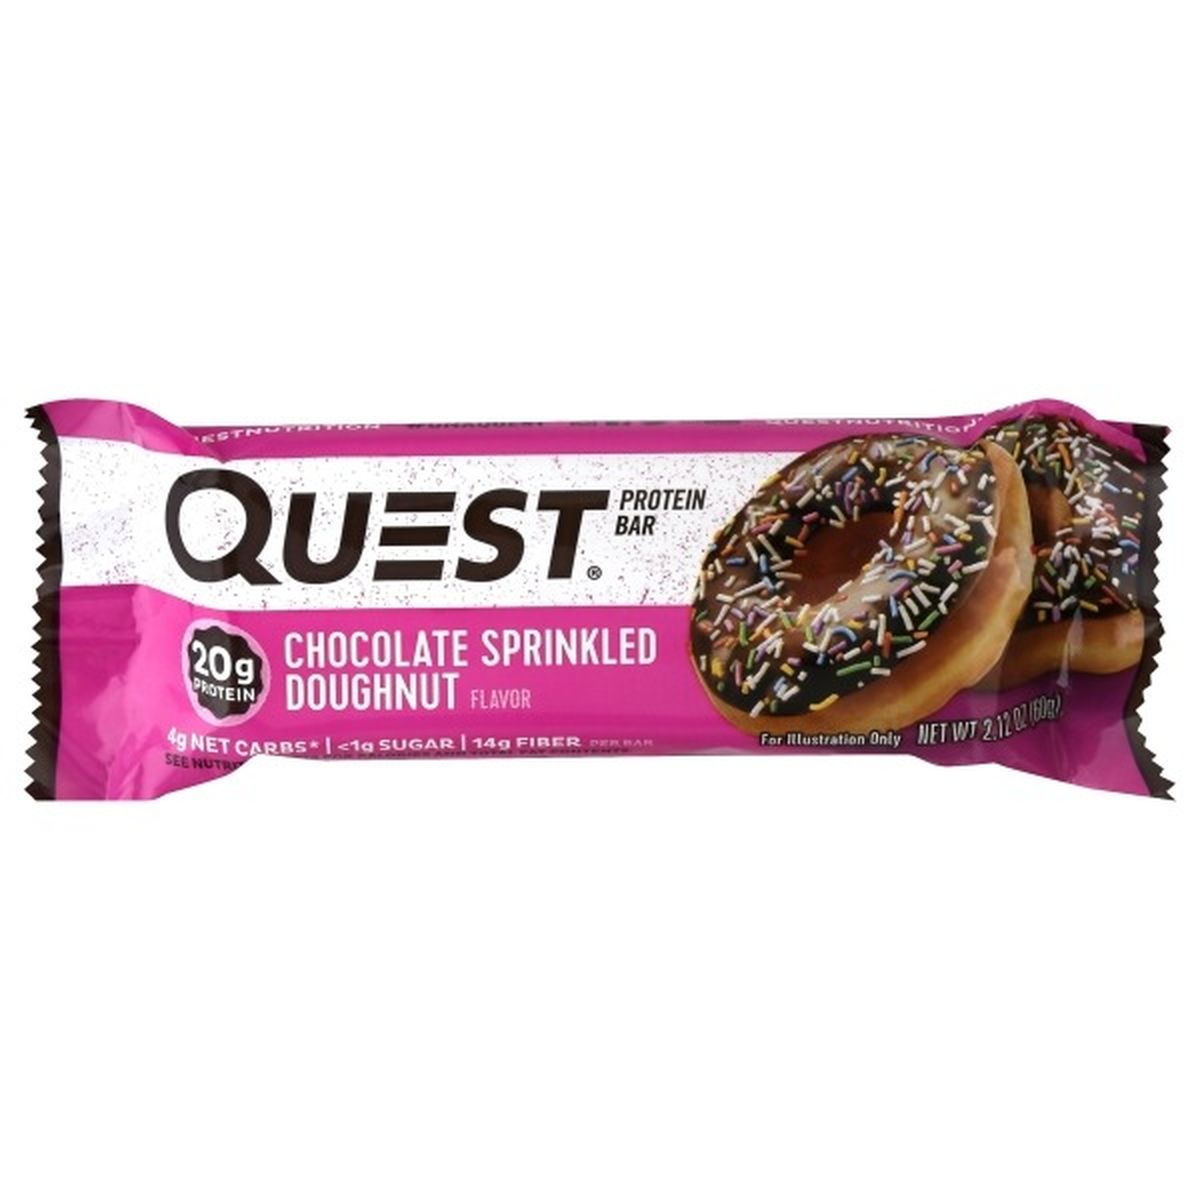 Calories in Quest Protein Bar, Chocolate Sprinkled Doughnut Flavor